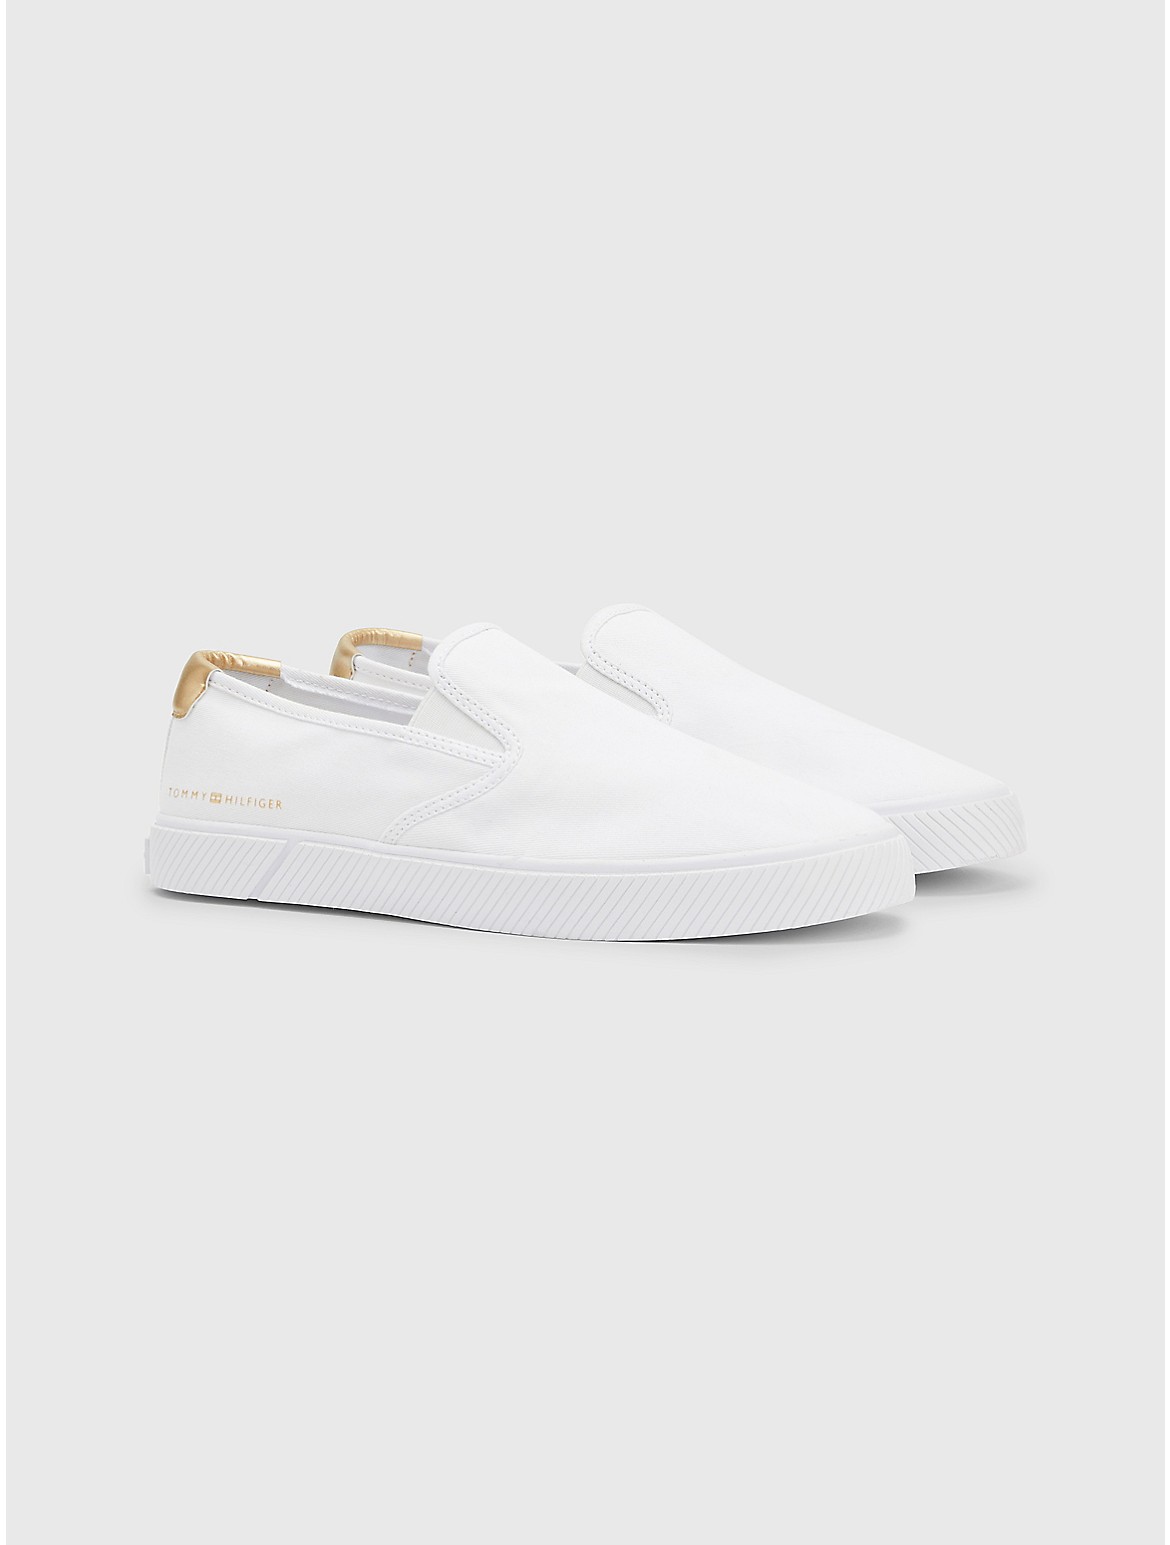 Tommy Hilfiger Women's Gold Accent Slip-On Sneaker - White - 6